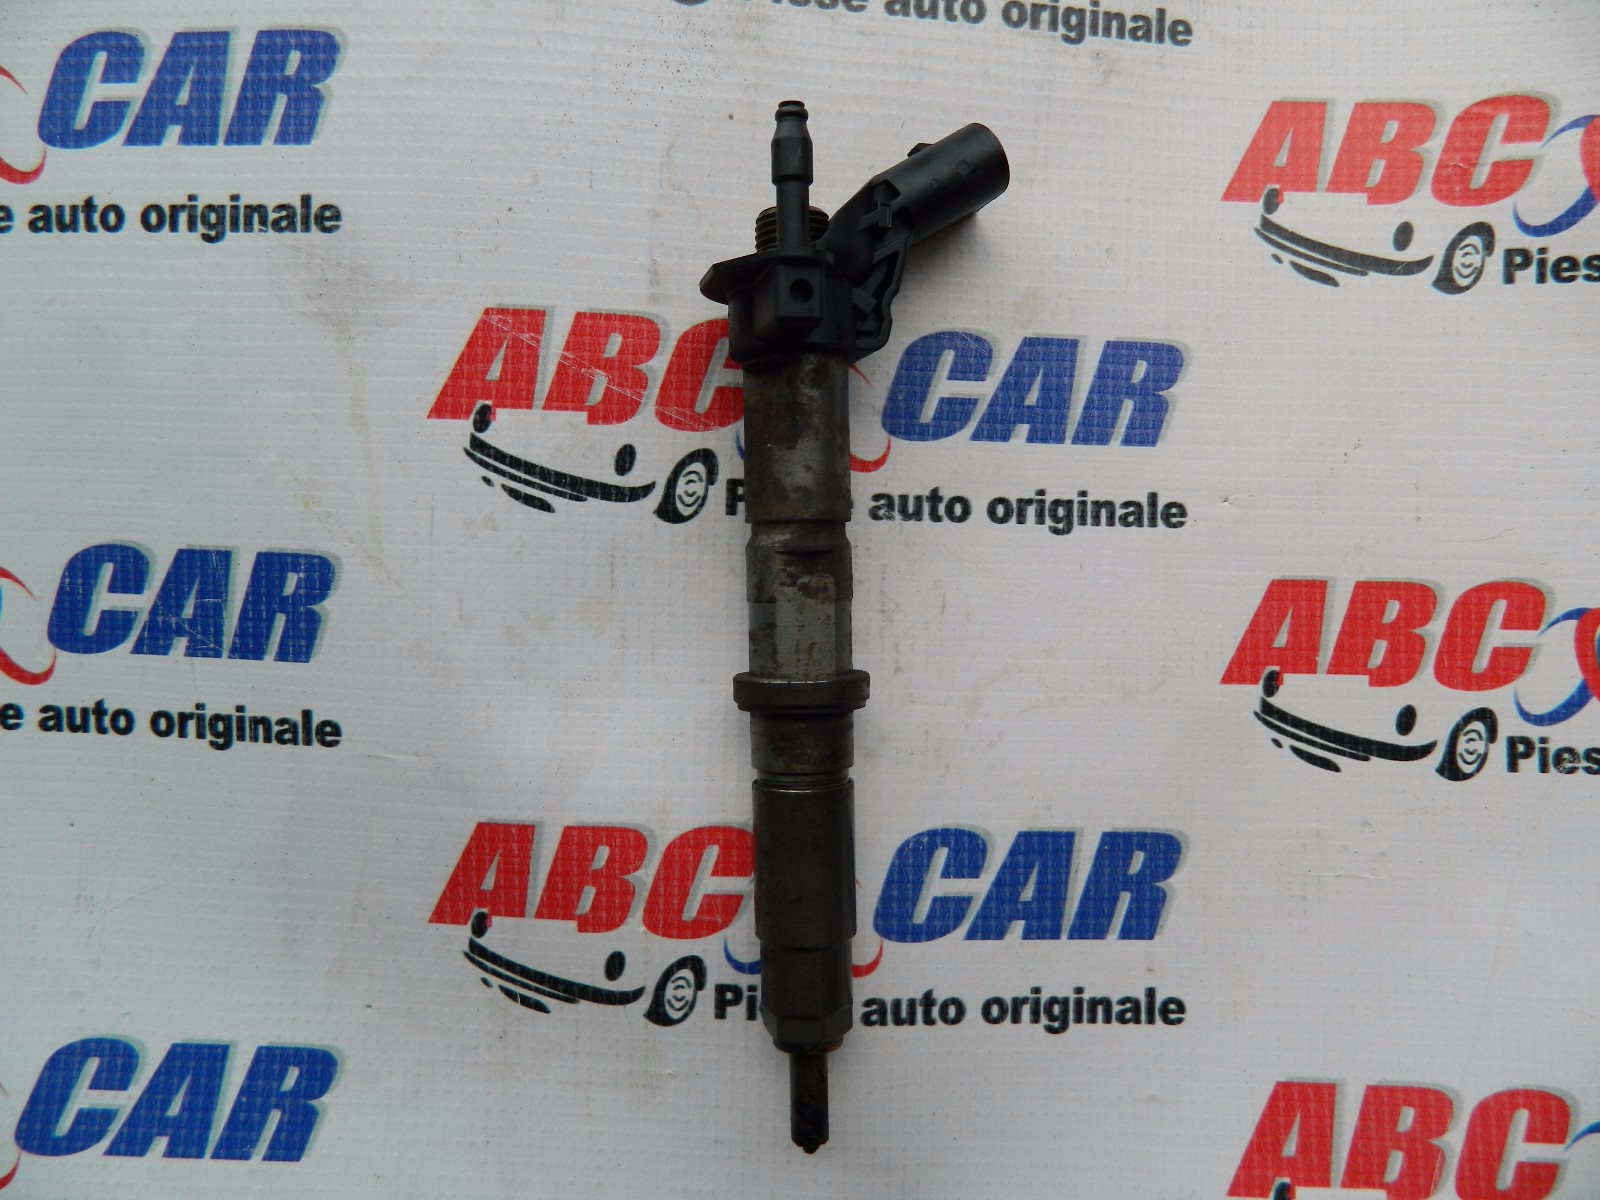 Injector VW Crafter 2 20112016 2.5 TDI 076130277 Piese